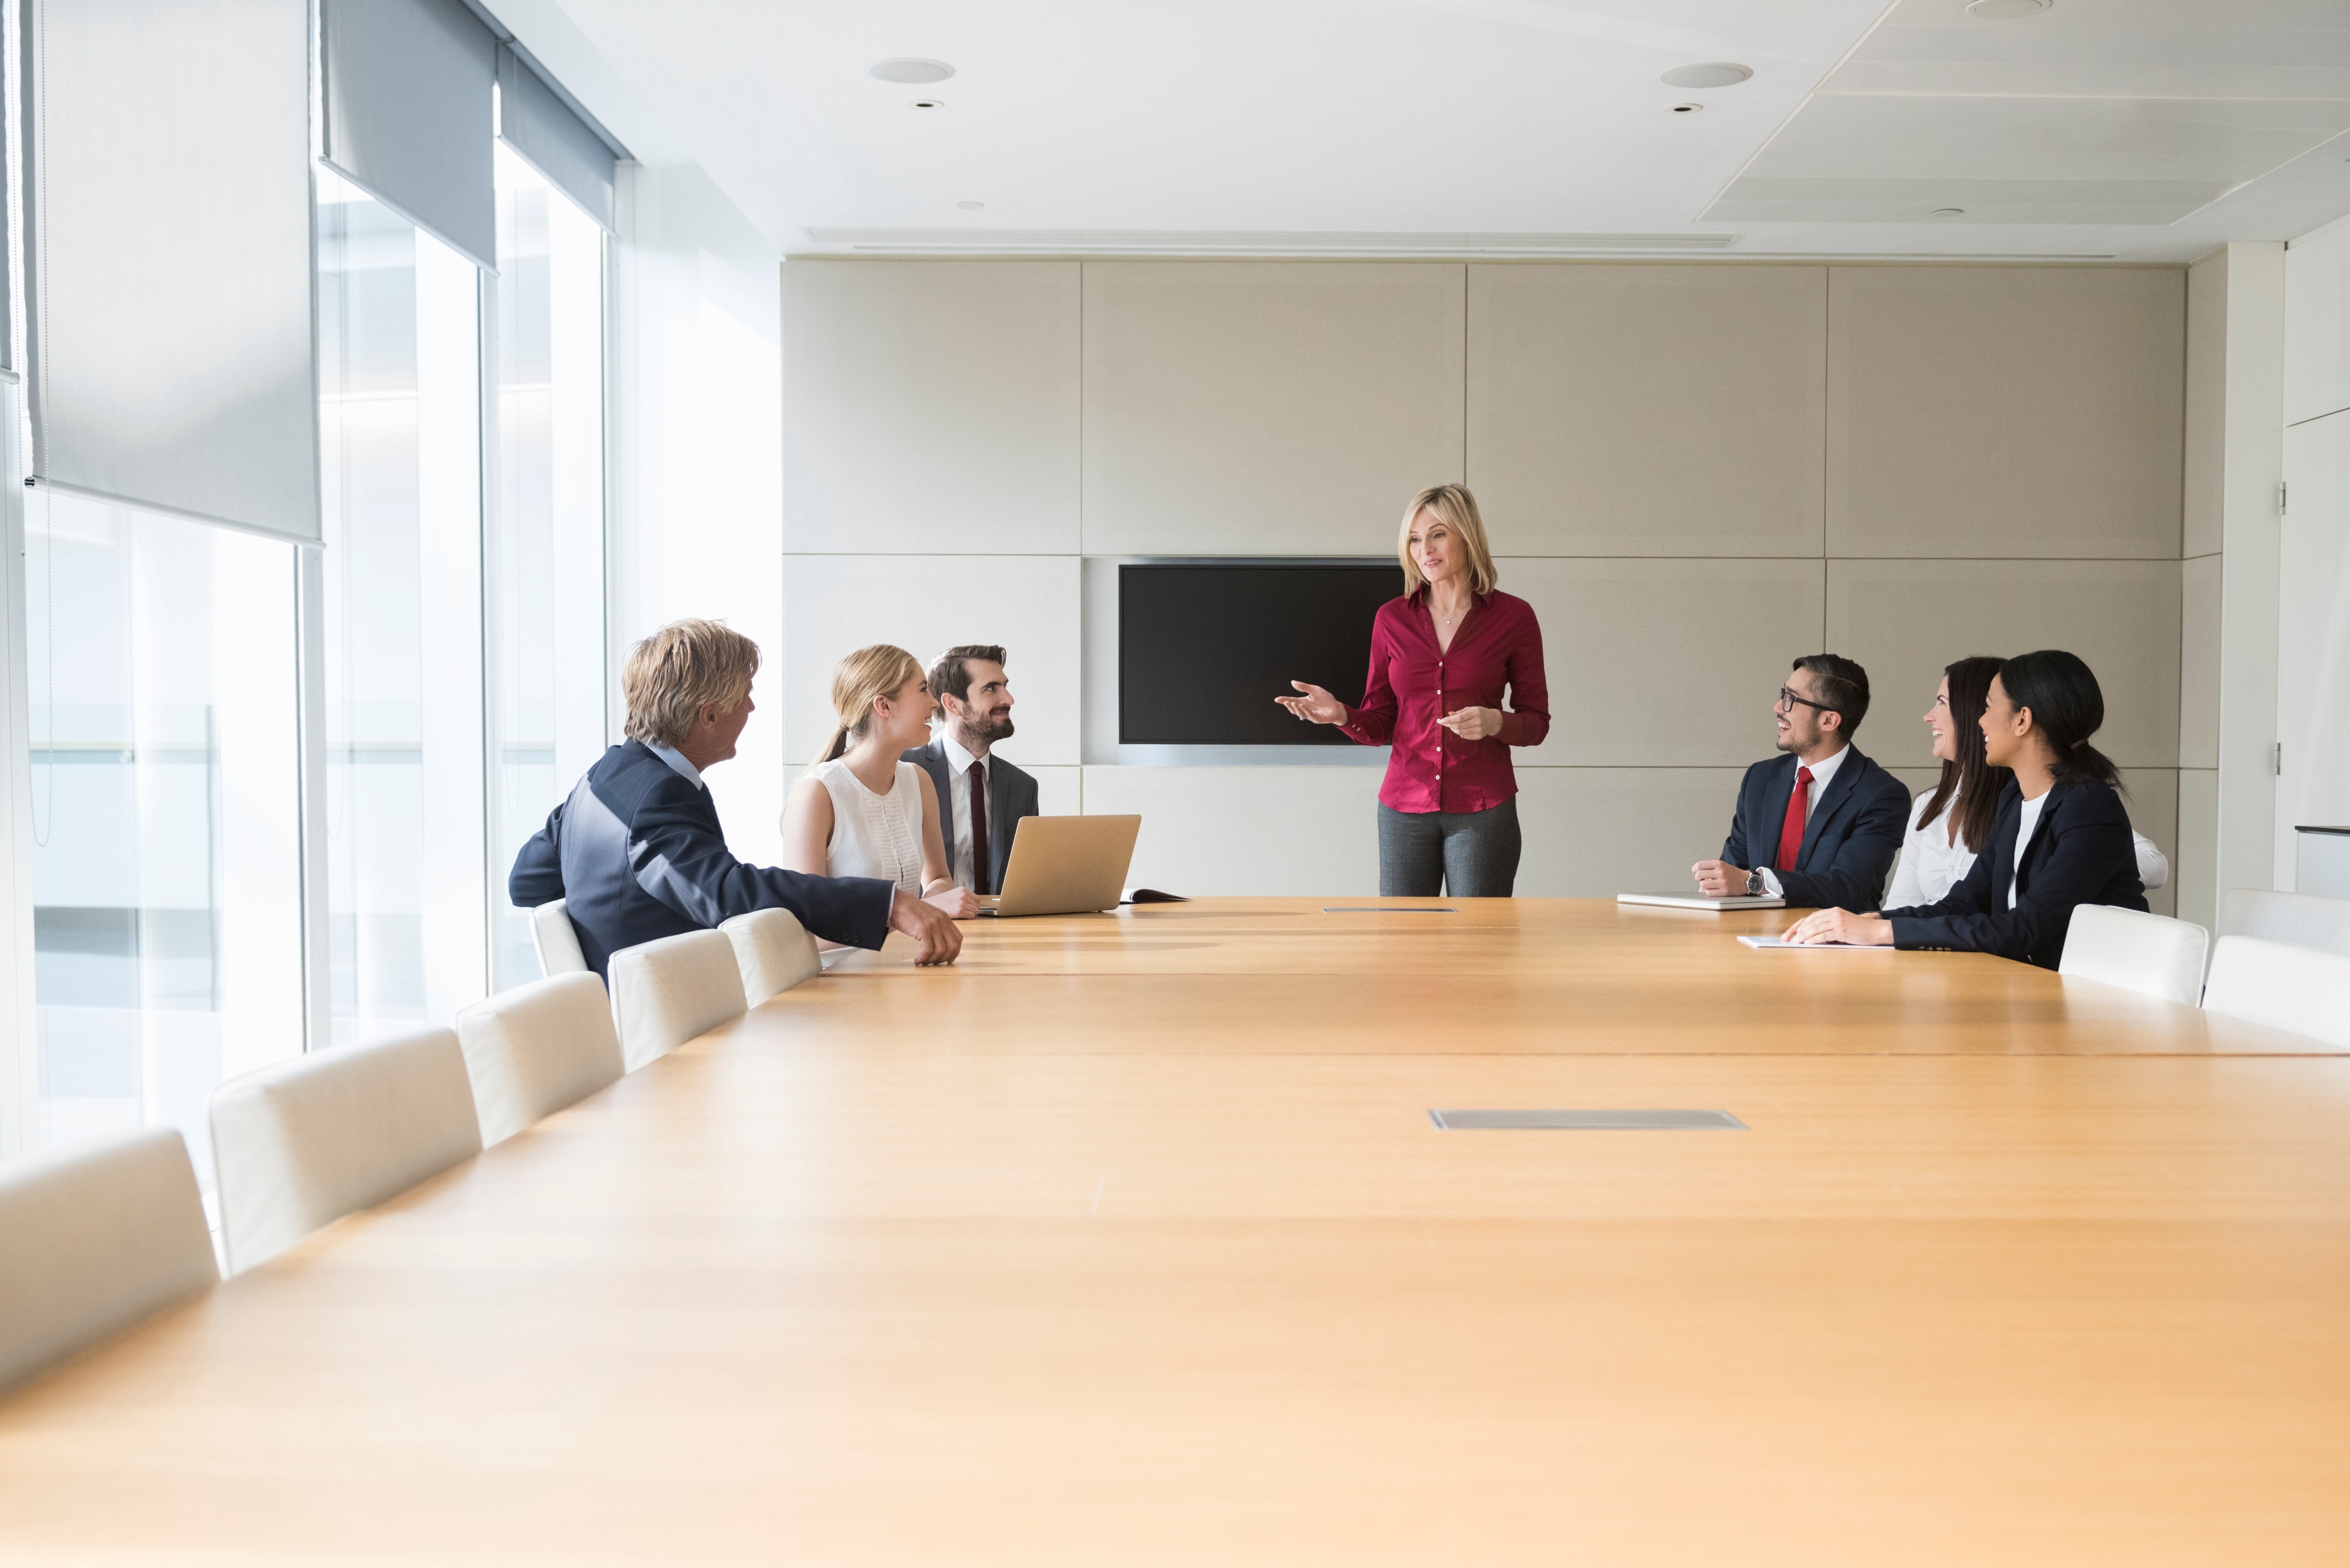 A photo of businesswoman giving presentation to colleagues at conference table. Professionals are in formals. Business people are in board room. Concentrated associates listening to presentation, in a brightly lit modern office. (Getty Images)